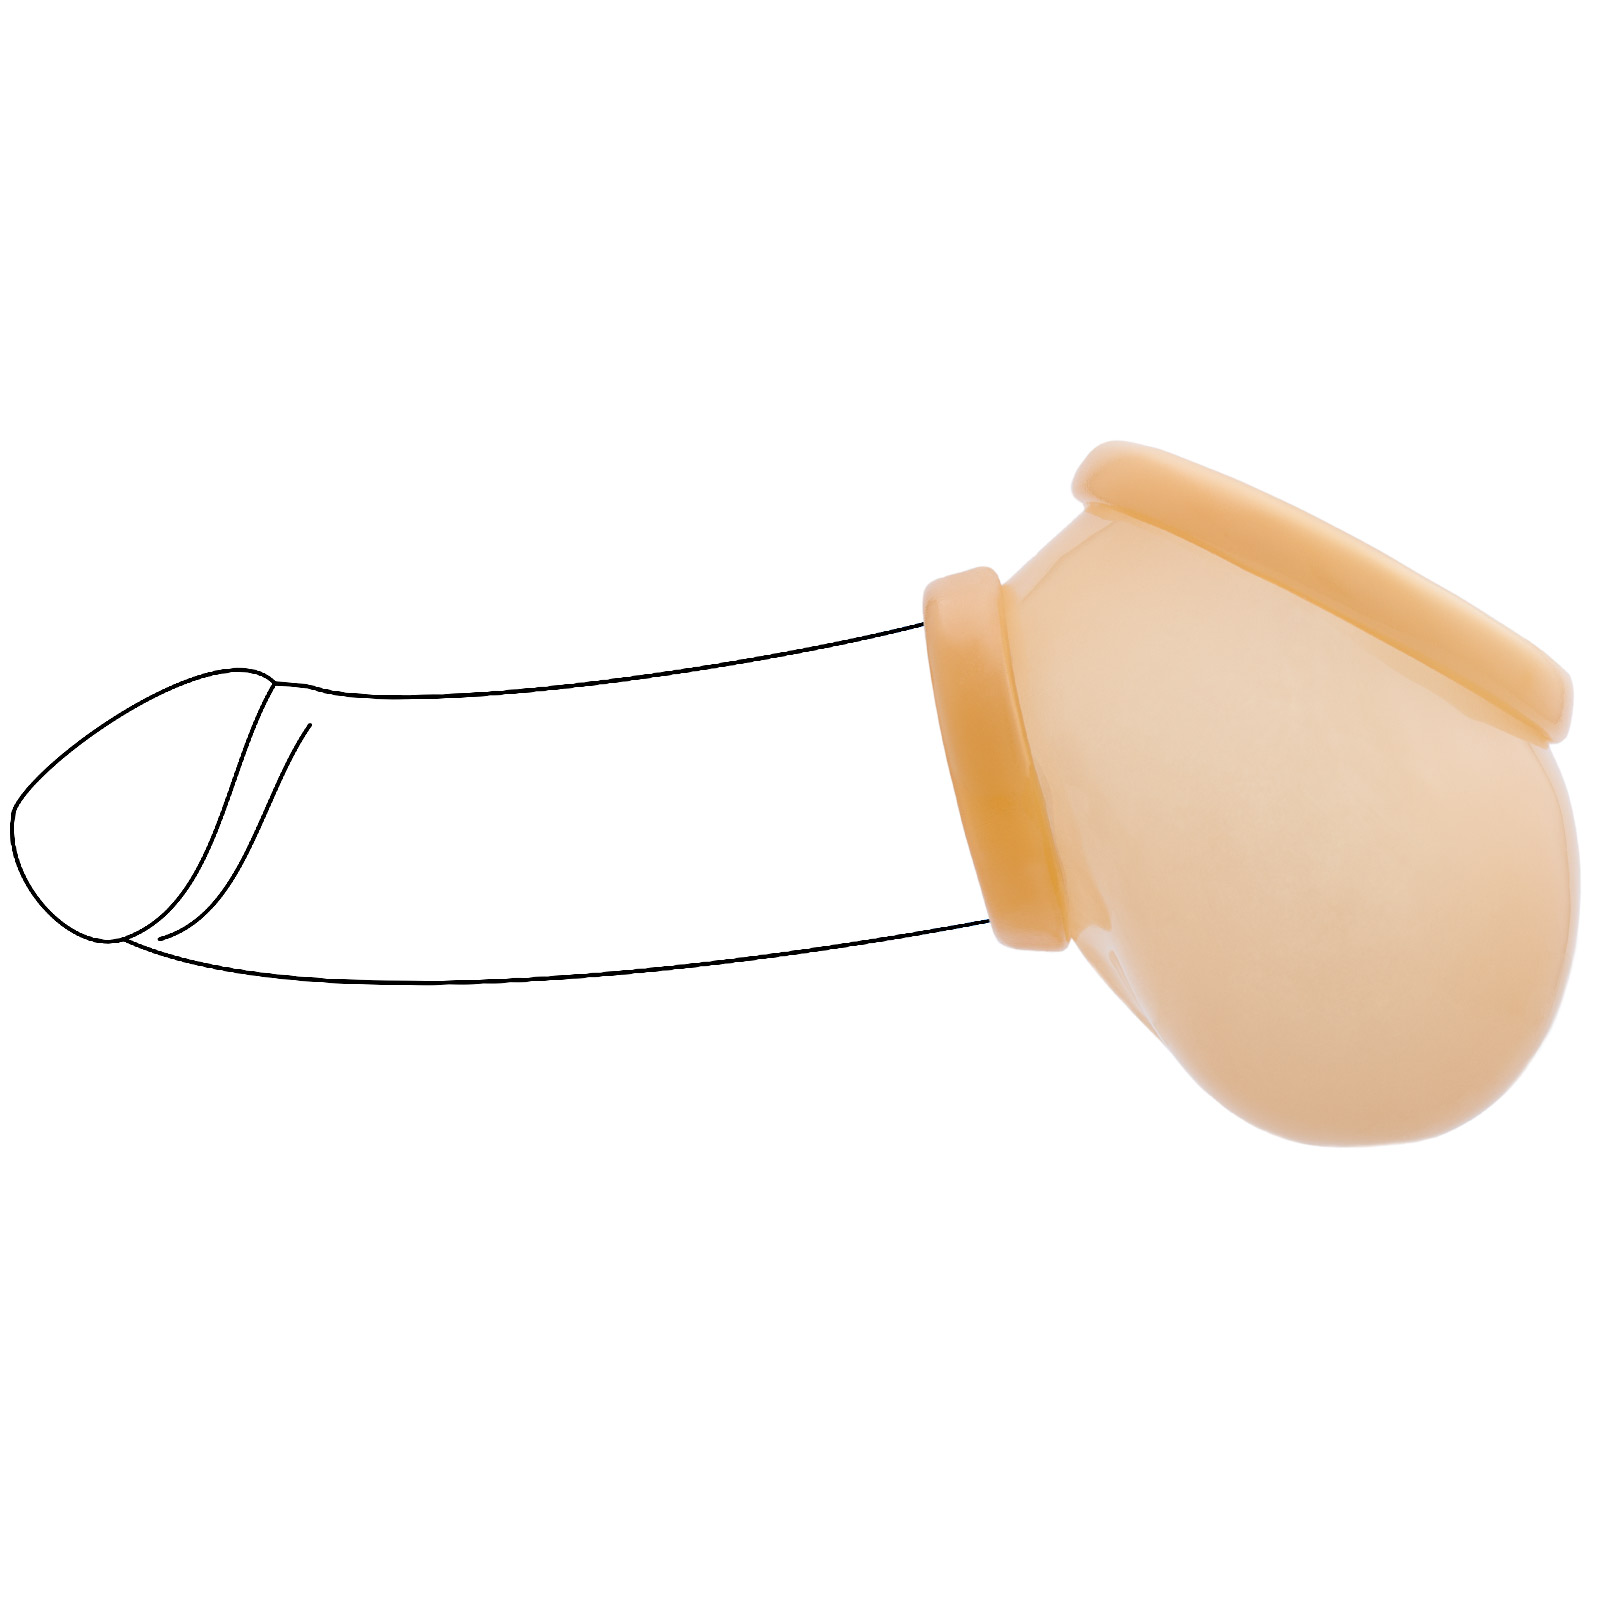 Toylie Latex Penis Sleeve «BEN» semi-transparent, without shaft, with penis ring and molded scrotum - suitable for vegans